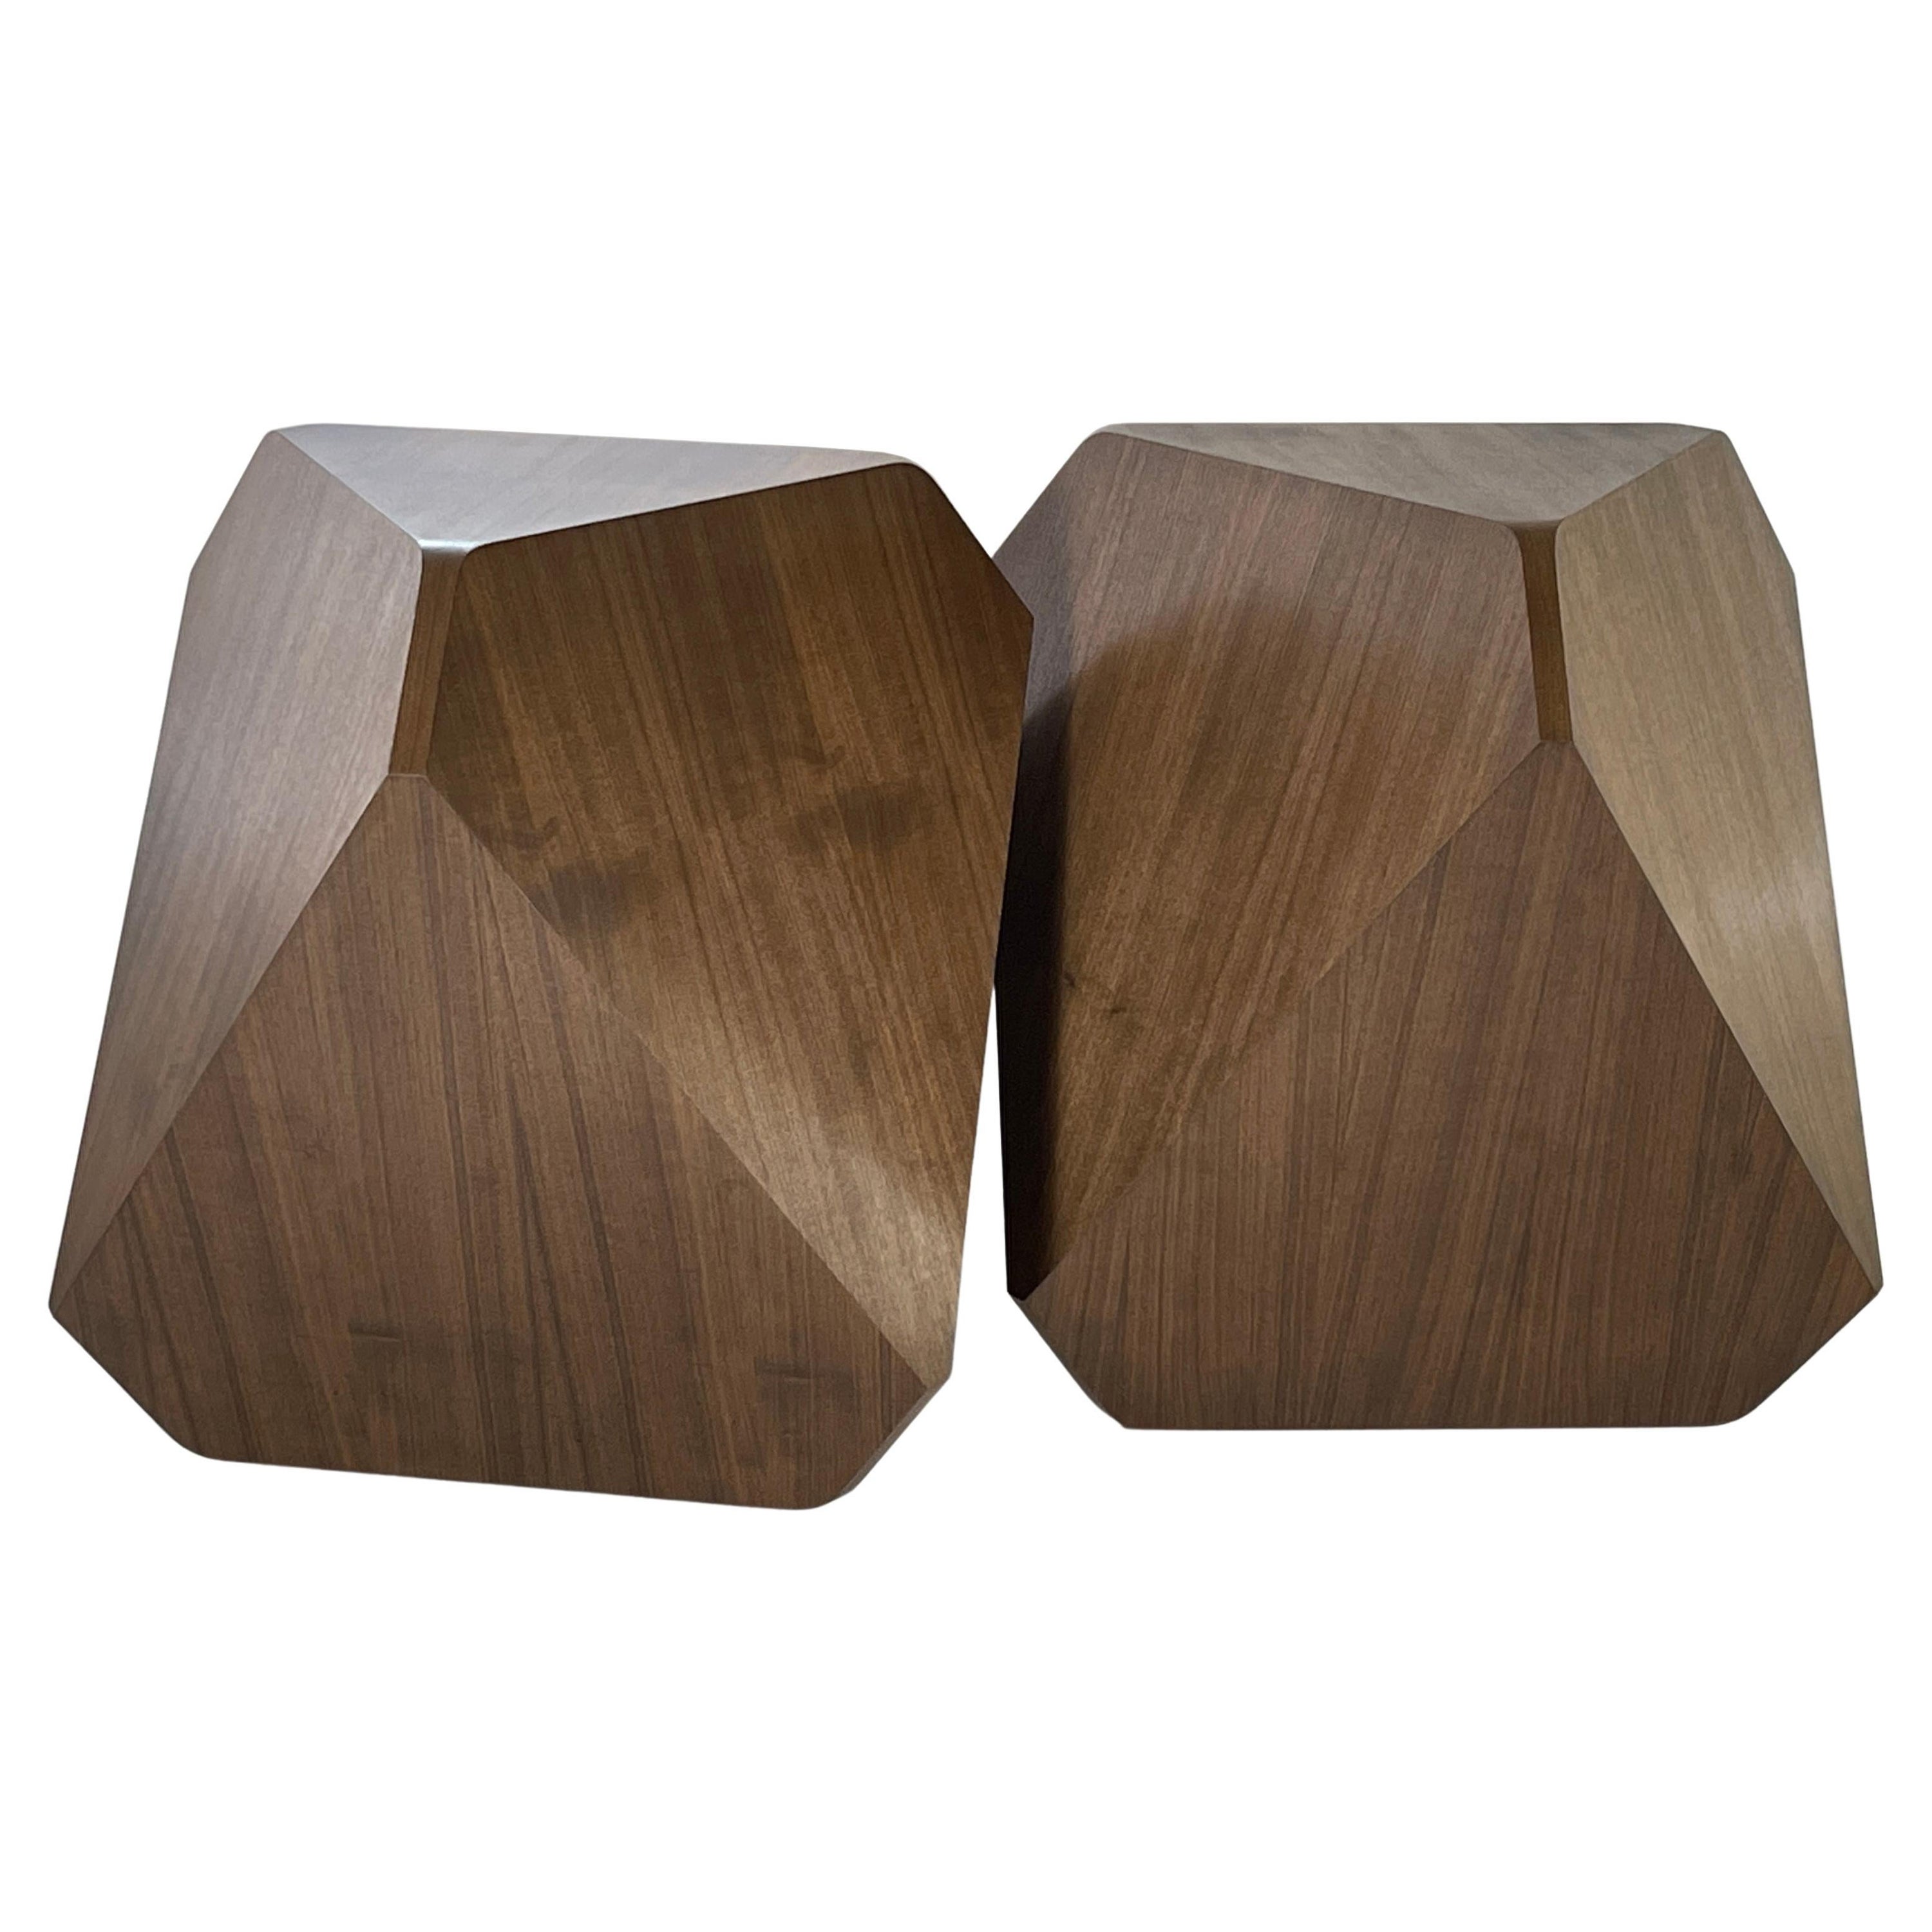 William Earle's iconic 'hal' dining pedestals For Sale